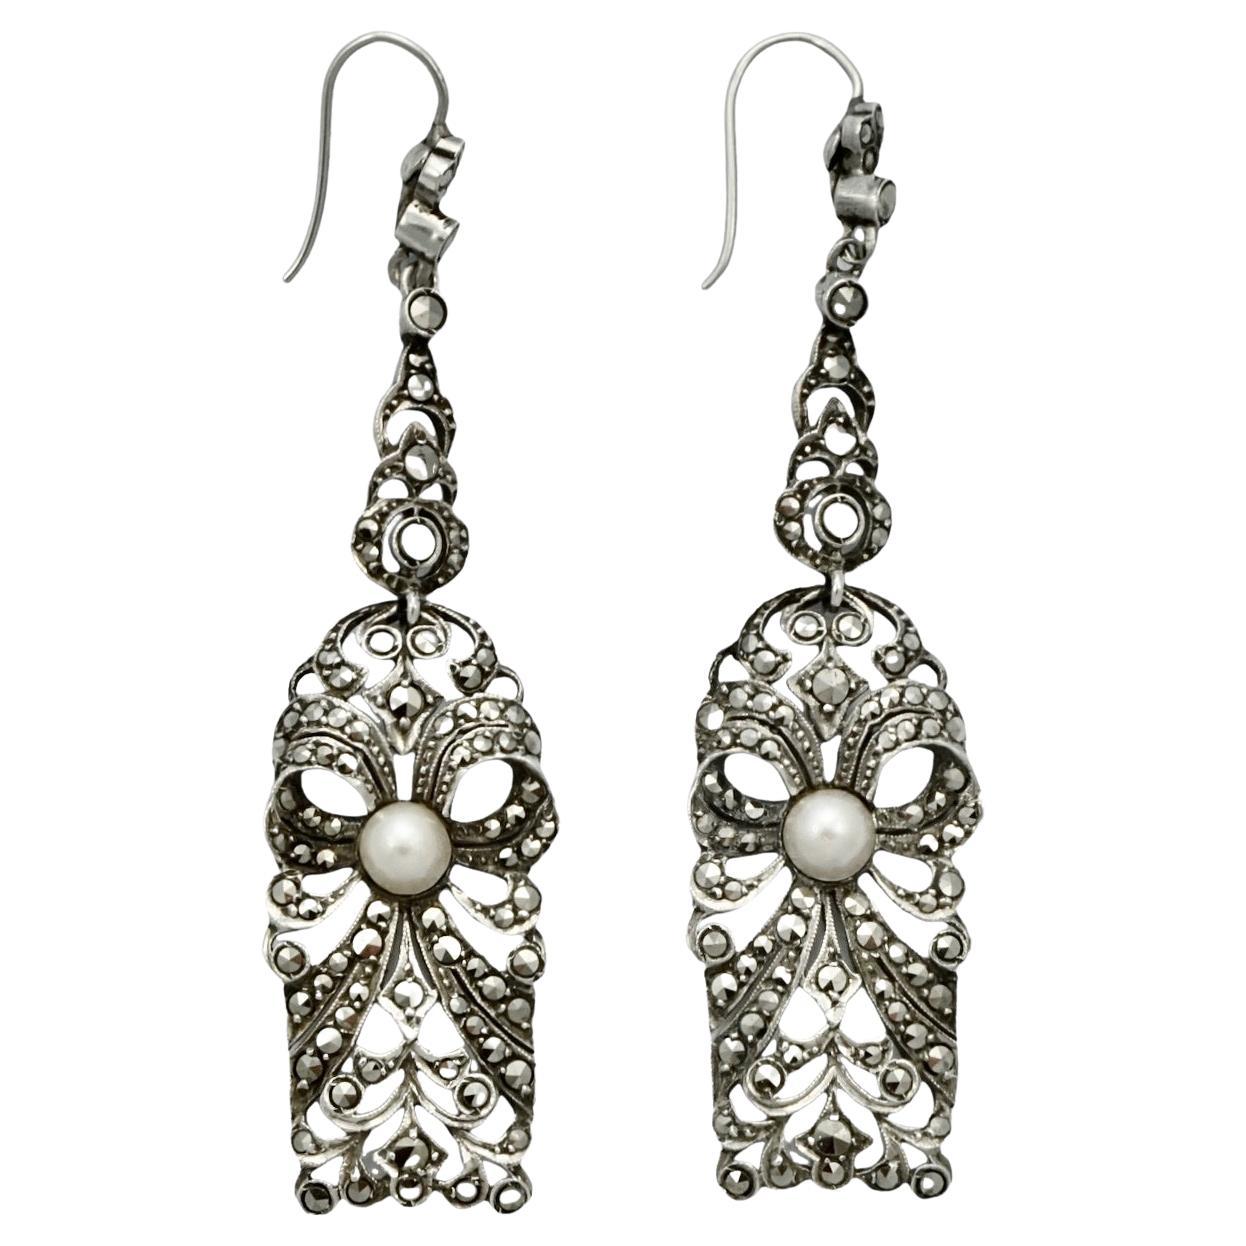 Art Deco Silver and Marcasite Earrings set with Mabe Cultured Pearls circa 1920s For Sale